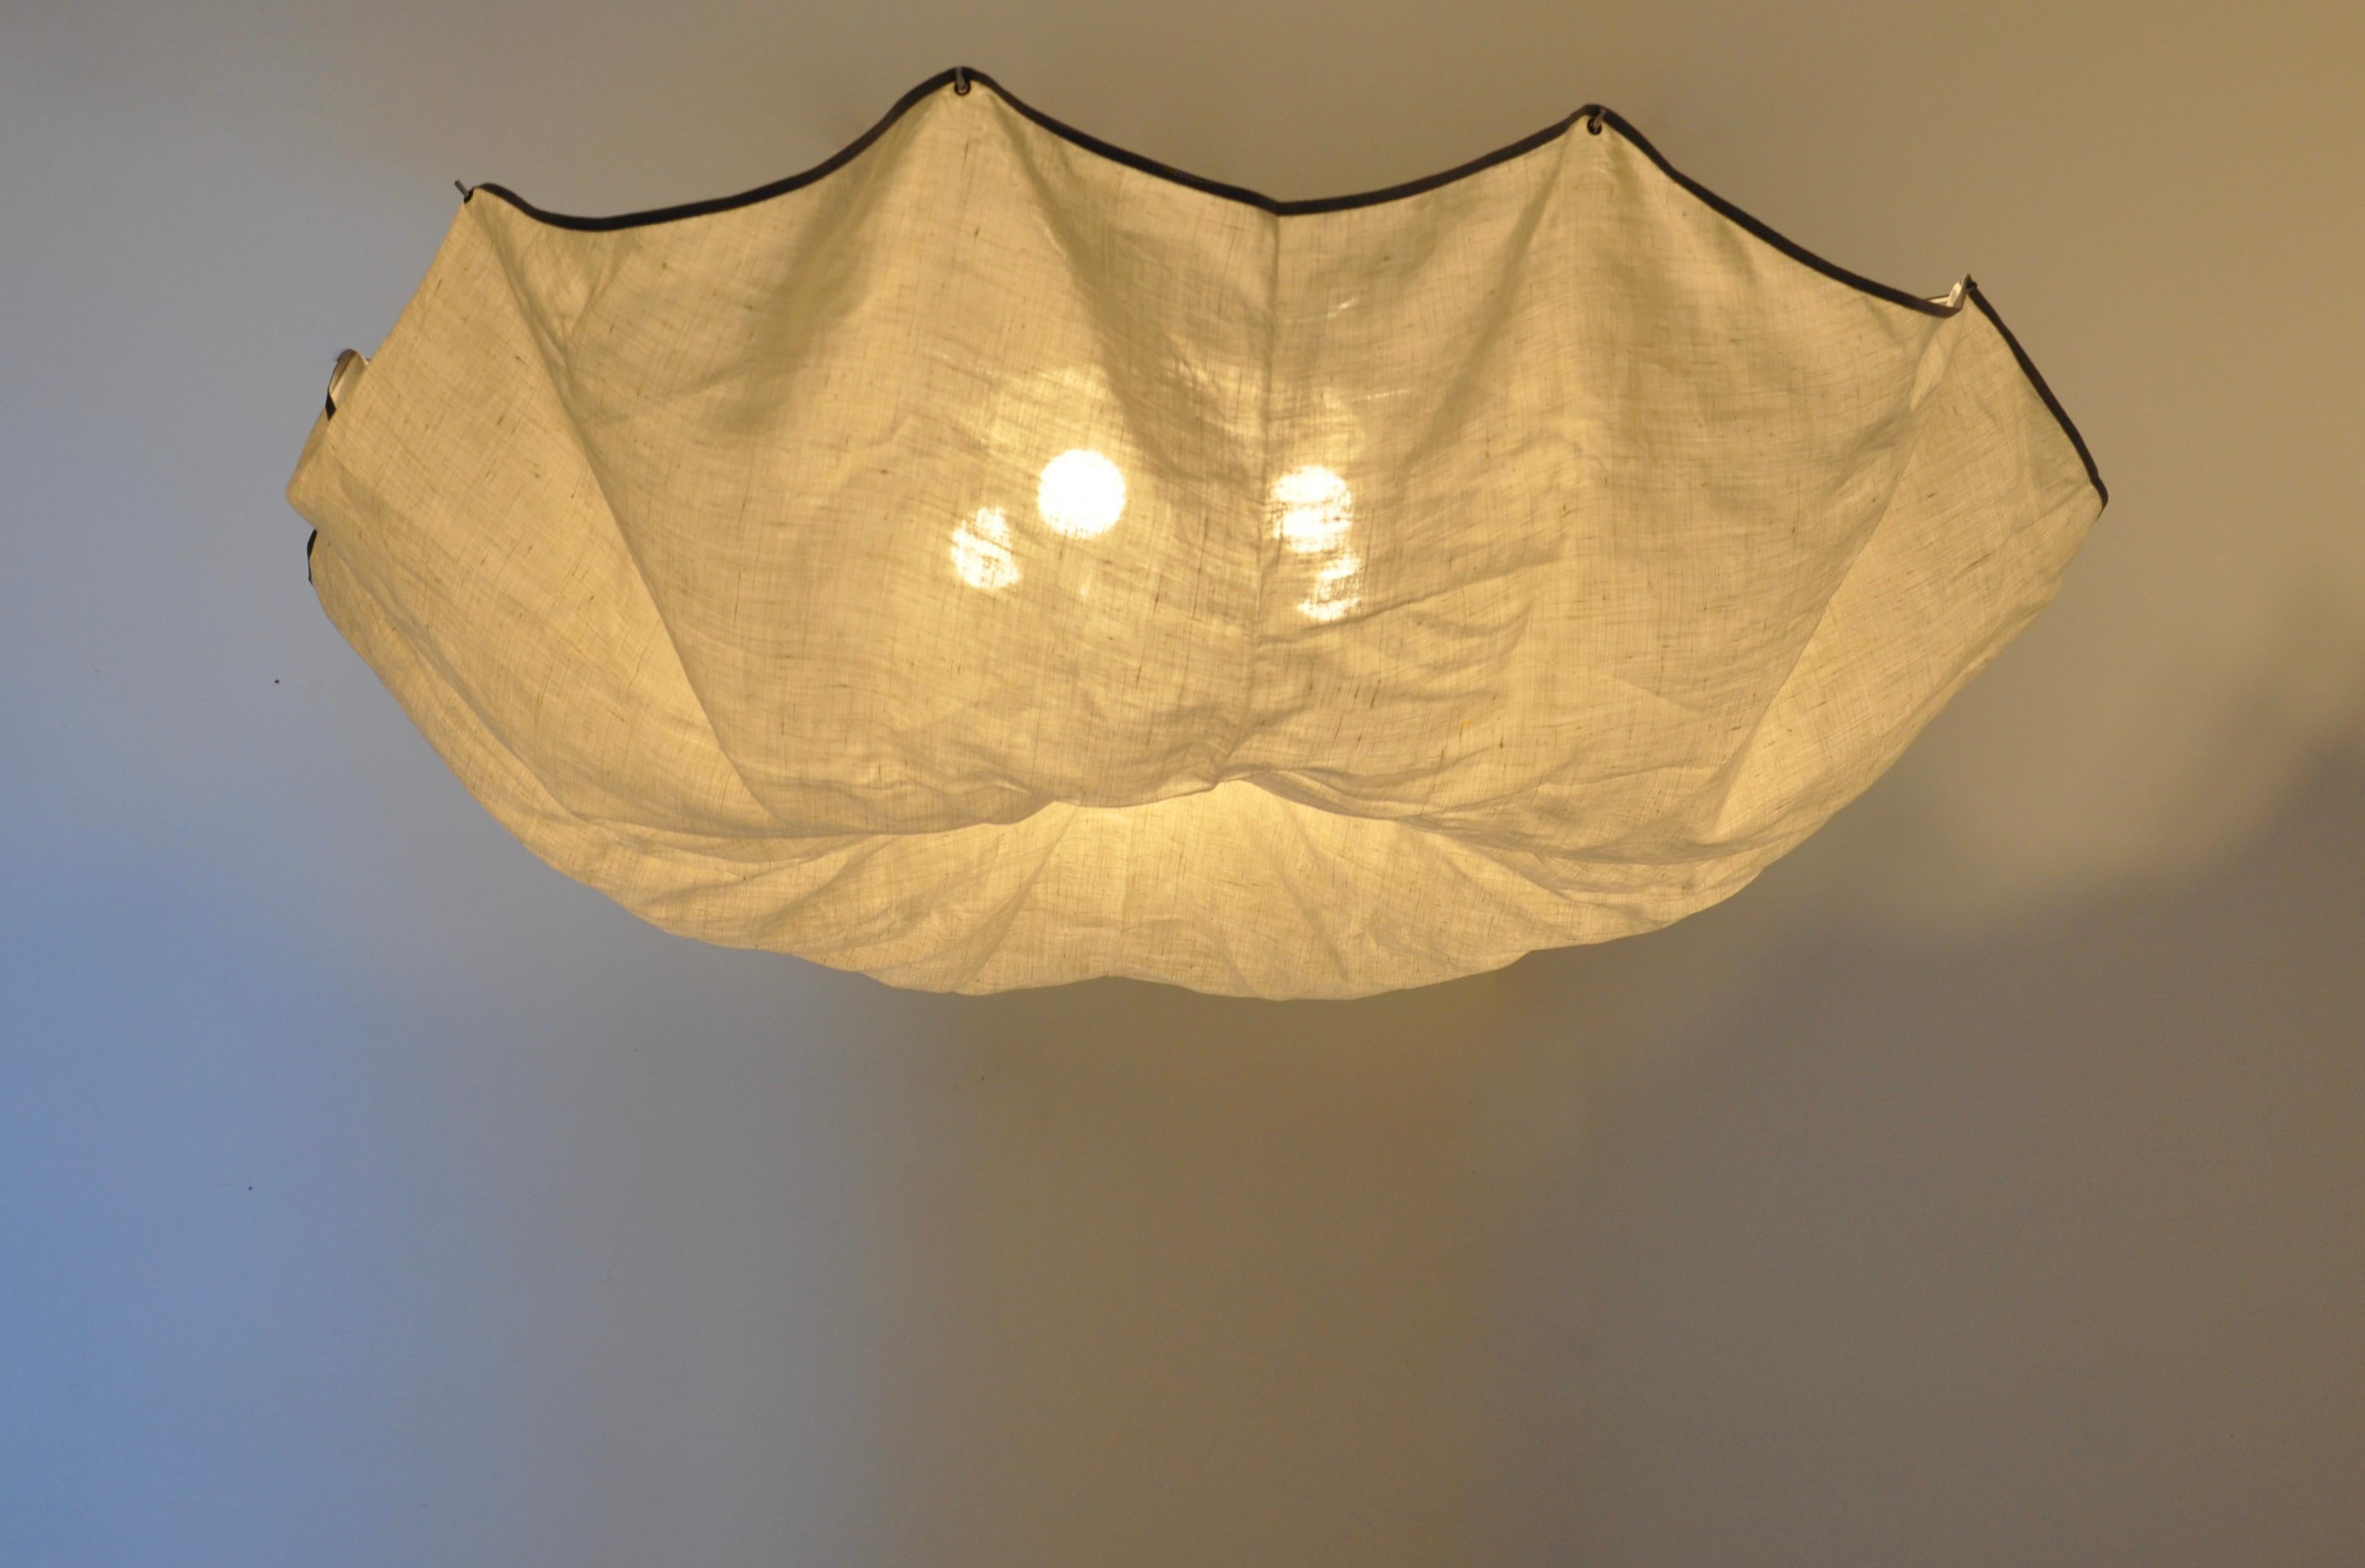 Ceiling light in white linen fabric and aluminum. Stamped Flos. Wear due to time and age. 